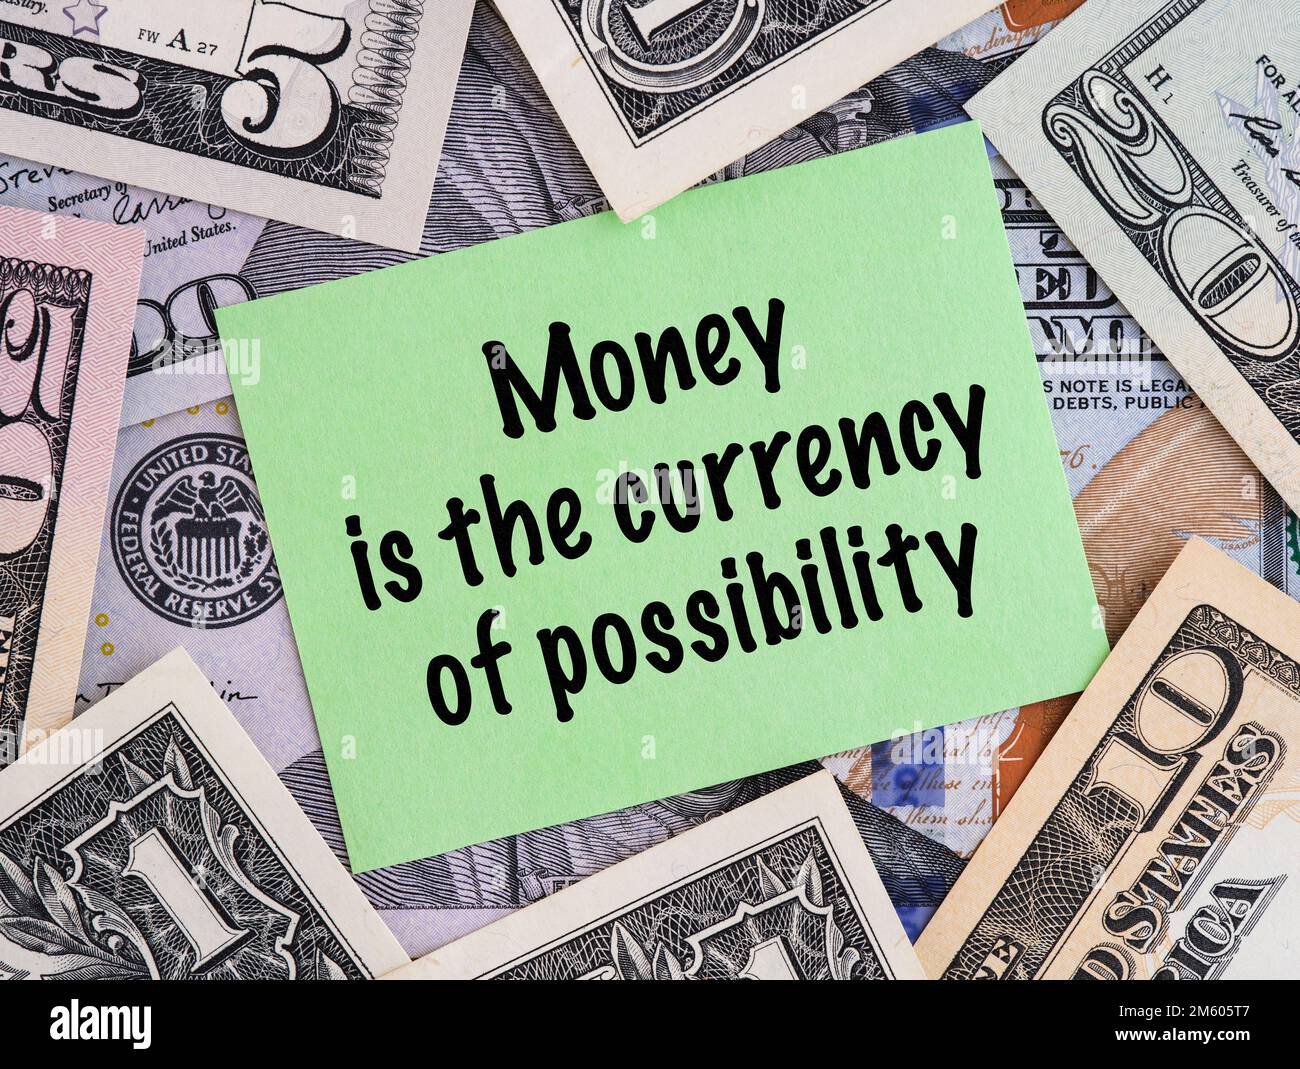 A Green paper note with phrase Money is the currency of possibility on a United States Dollar bills background. Stock Photo